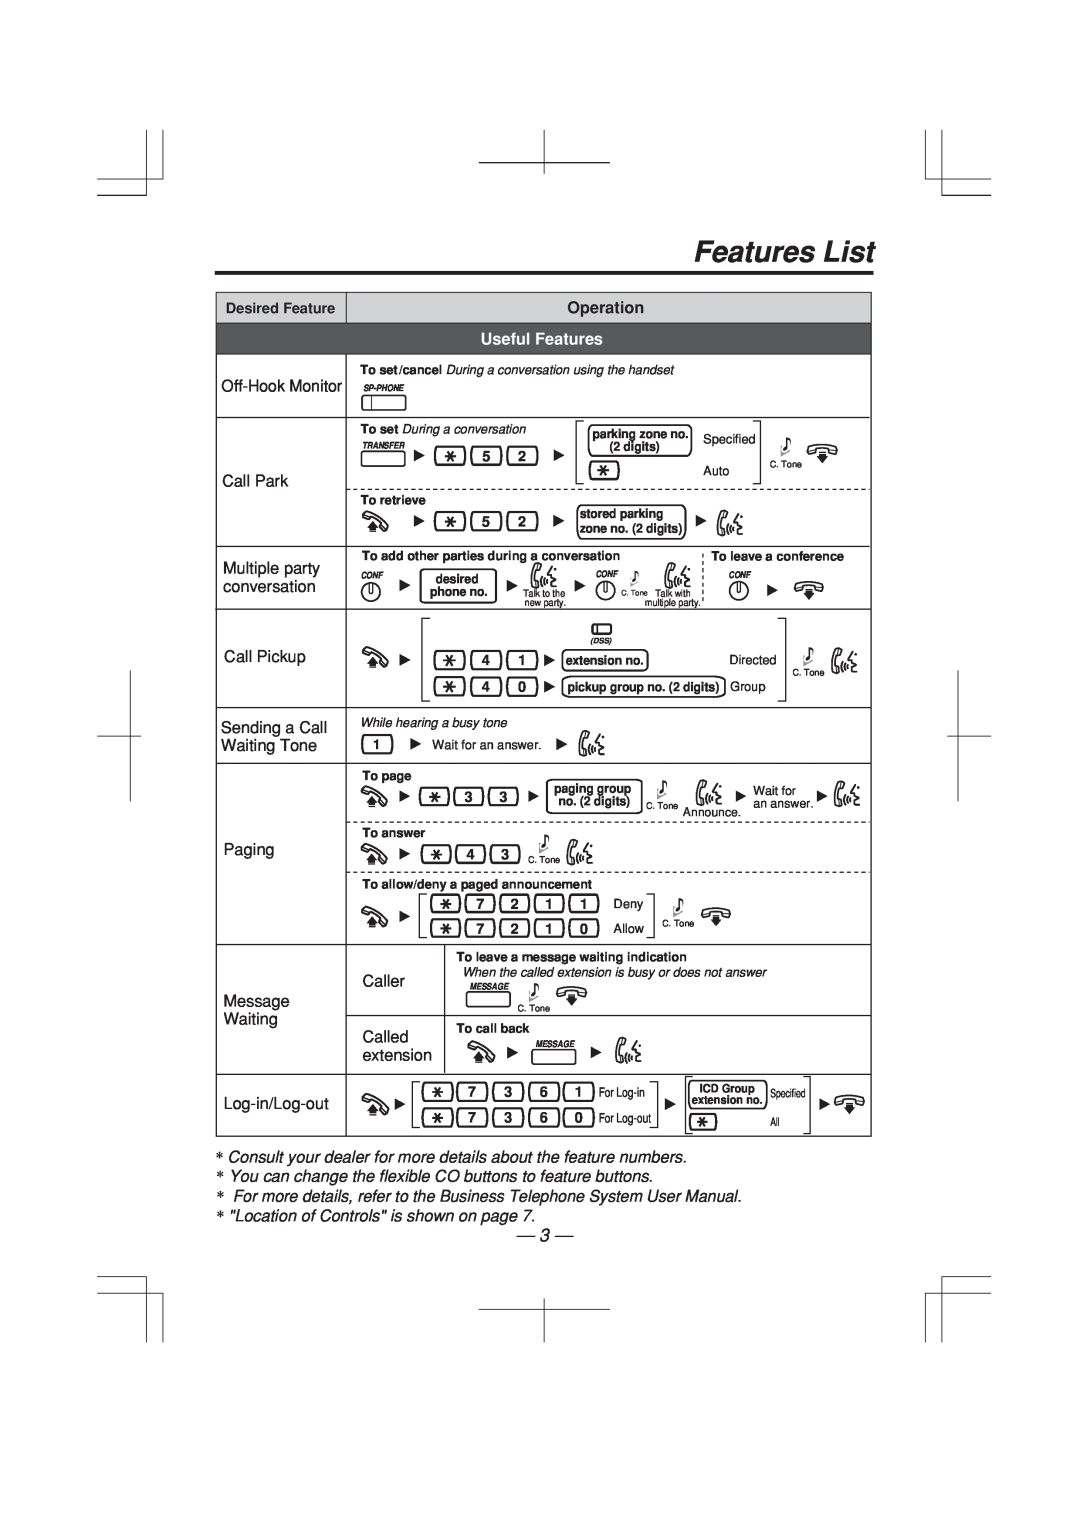 Panasonic KX-T7630E Features List, Useful Features, For more details, refer to the Business Telephone System User Manual 